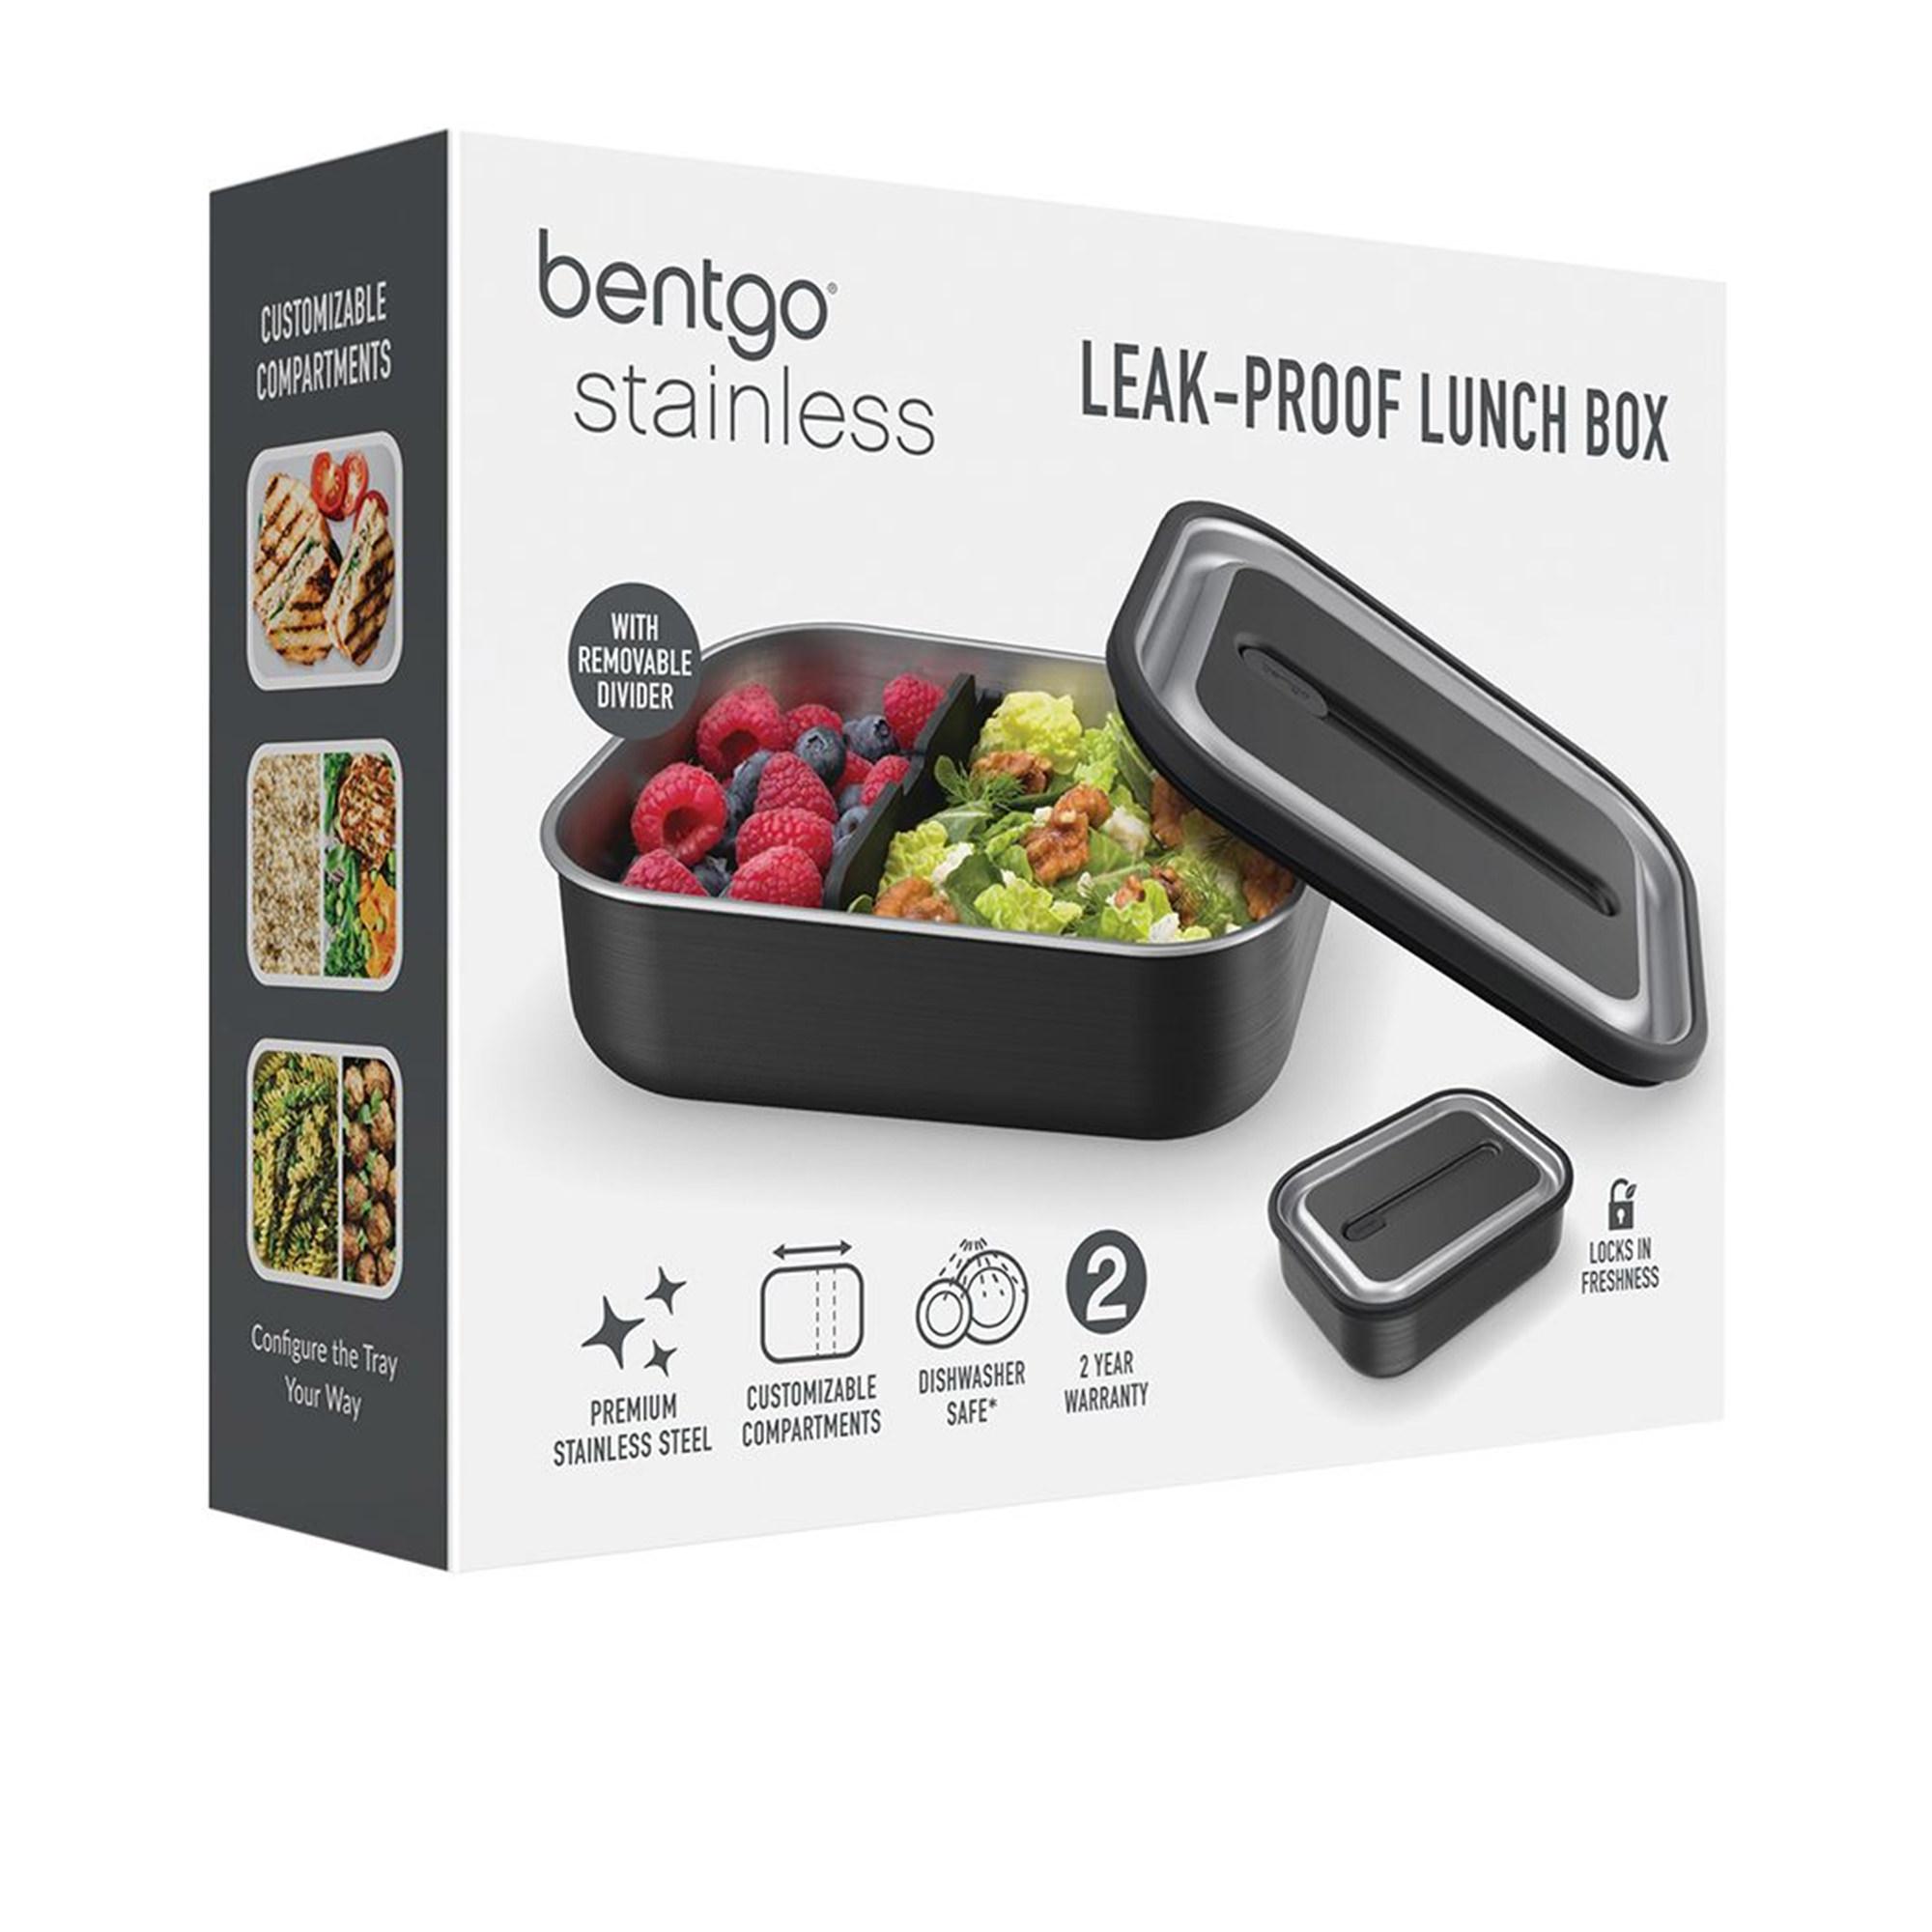 Bentgo Stainless Steel Leak Proof Lunch Box 1.2L Carbon Black Image 6